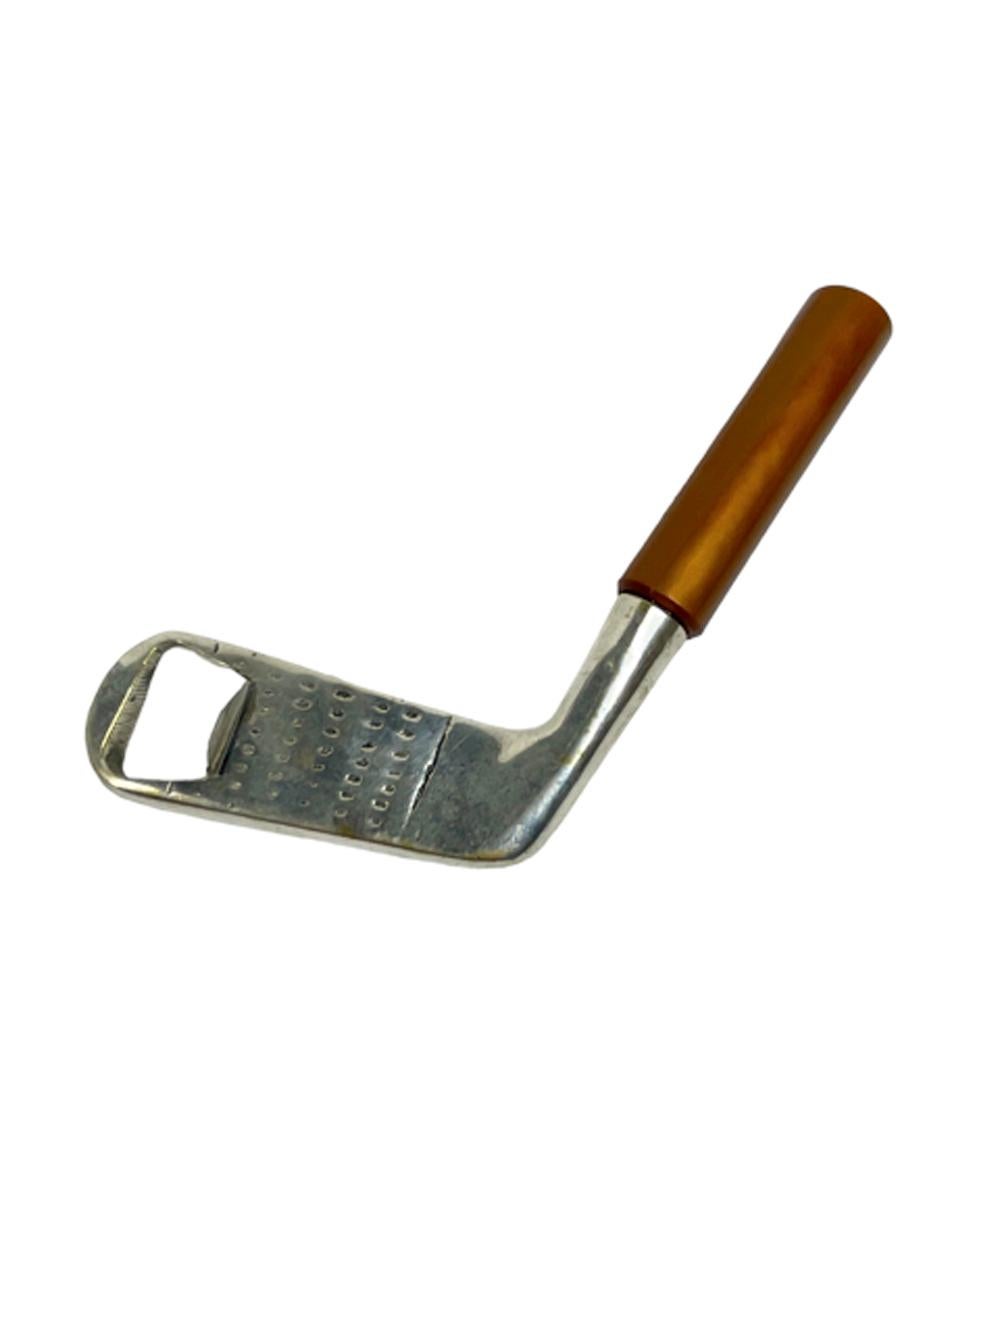 Vintage silver plate golf club bottle opener with a plastic shaft which unscrews to reveal a corkscrew. Marked P.H.V & Co. (P.H. Vogel) / Silver Plated / Made in England / Req. Des. 867184 